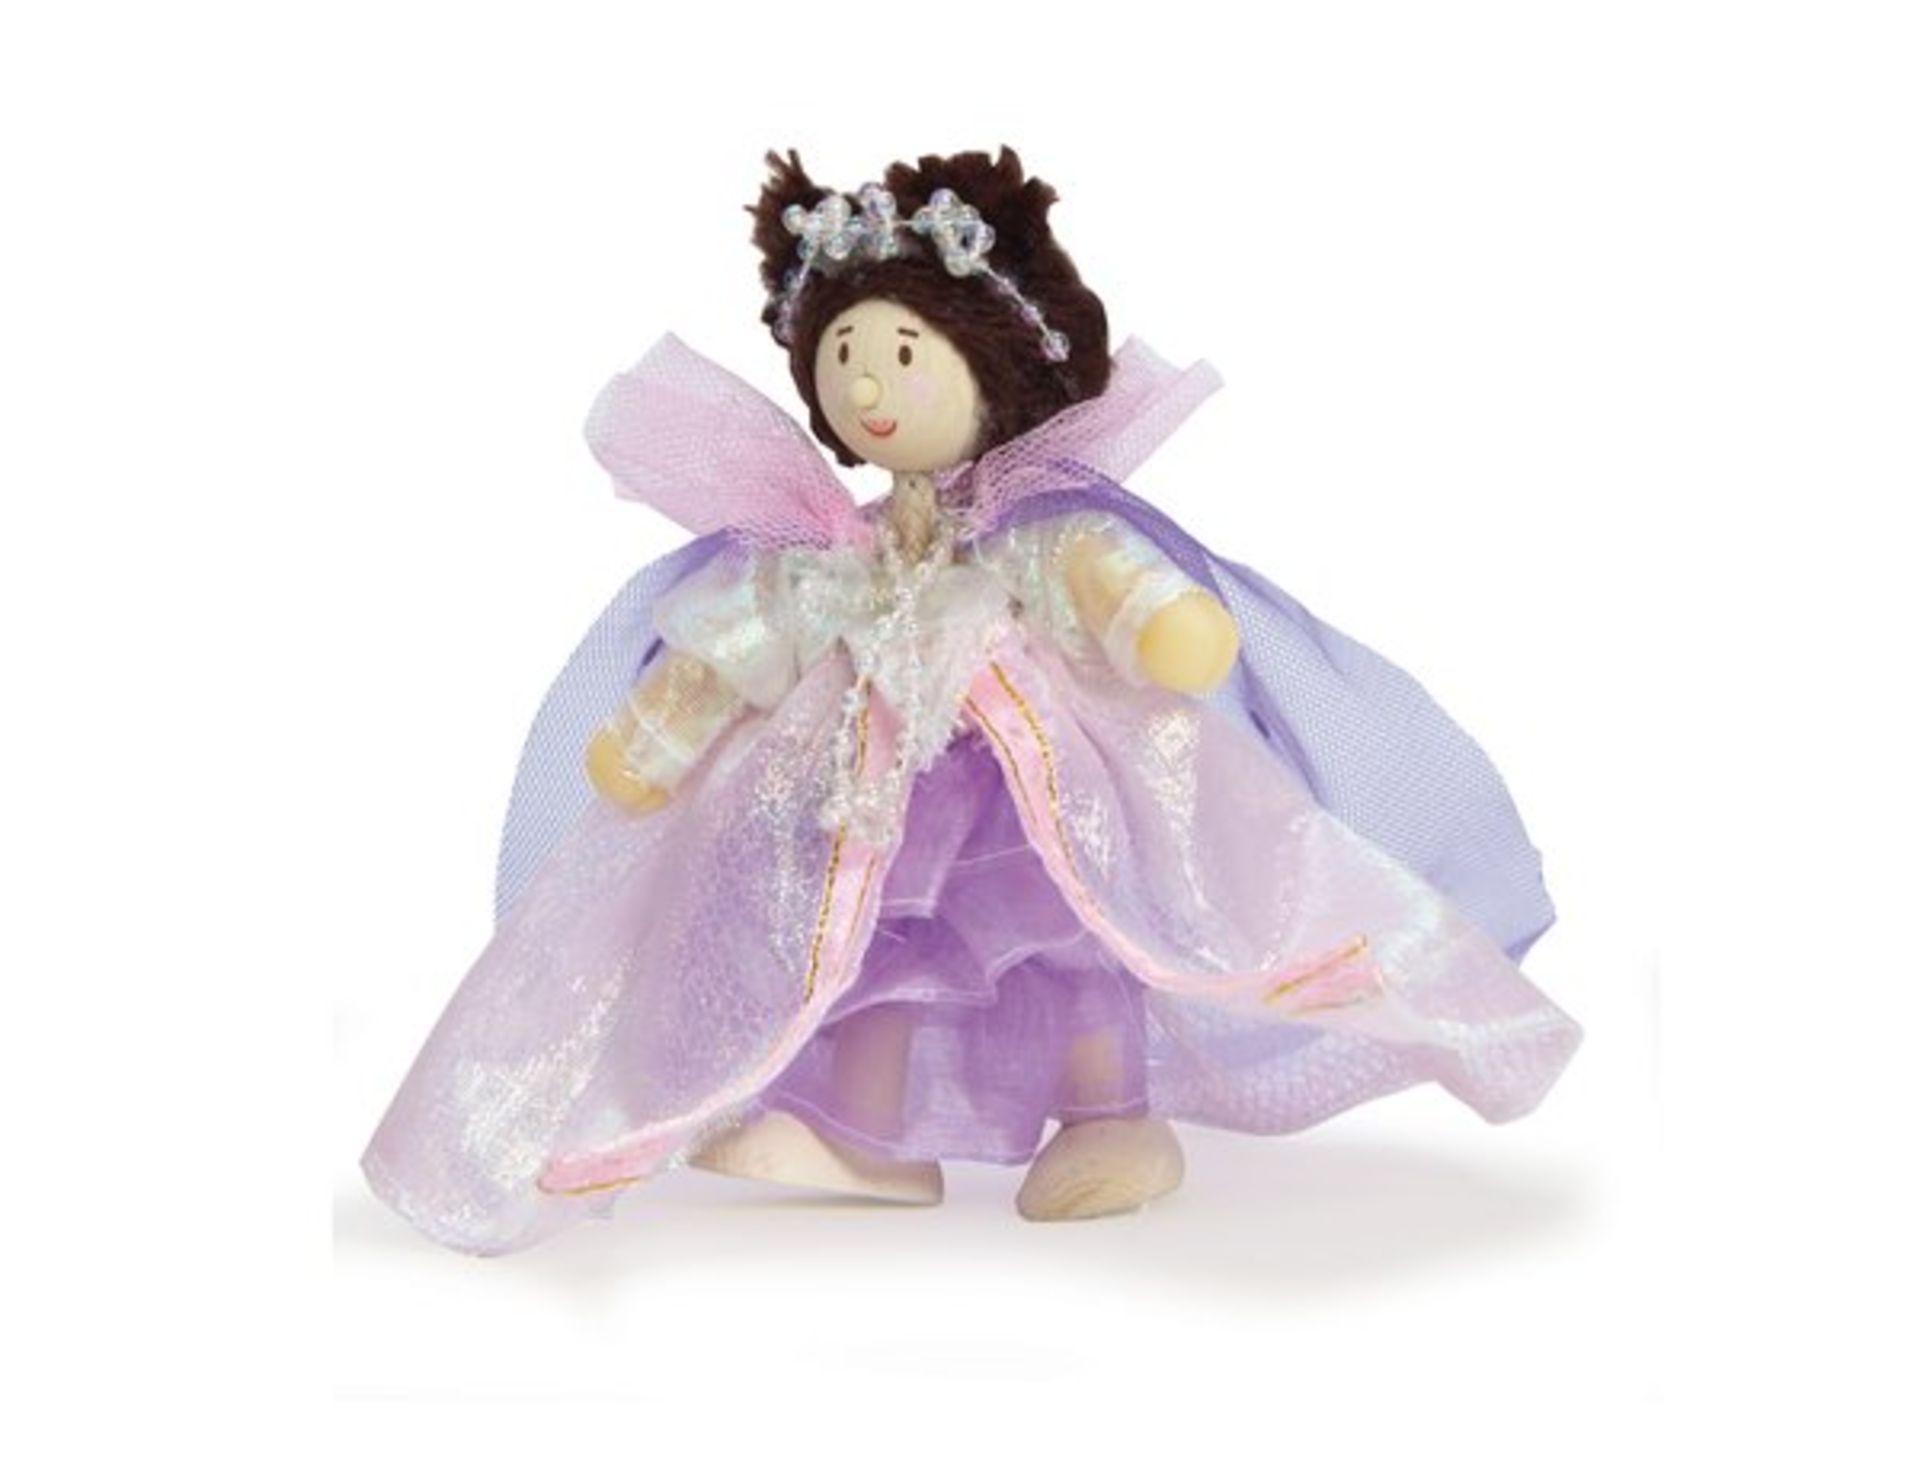 V Brand New A Lot Of Six Le Toy Van Budkins Bendy Wooden Royal Figures Includes King-Queen- - Image 3 of 6